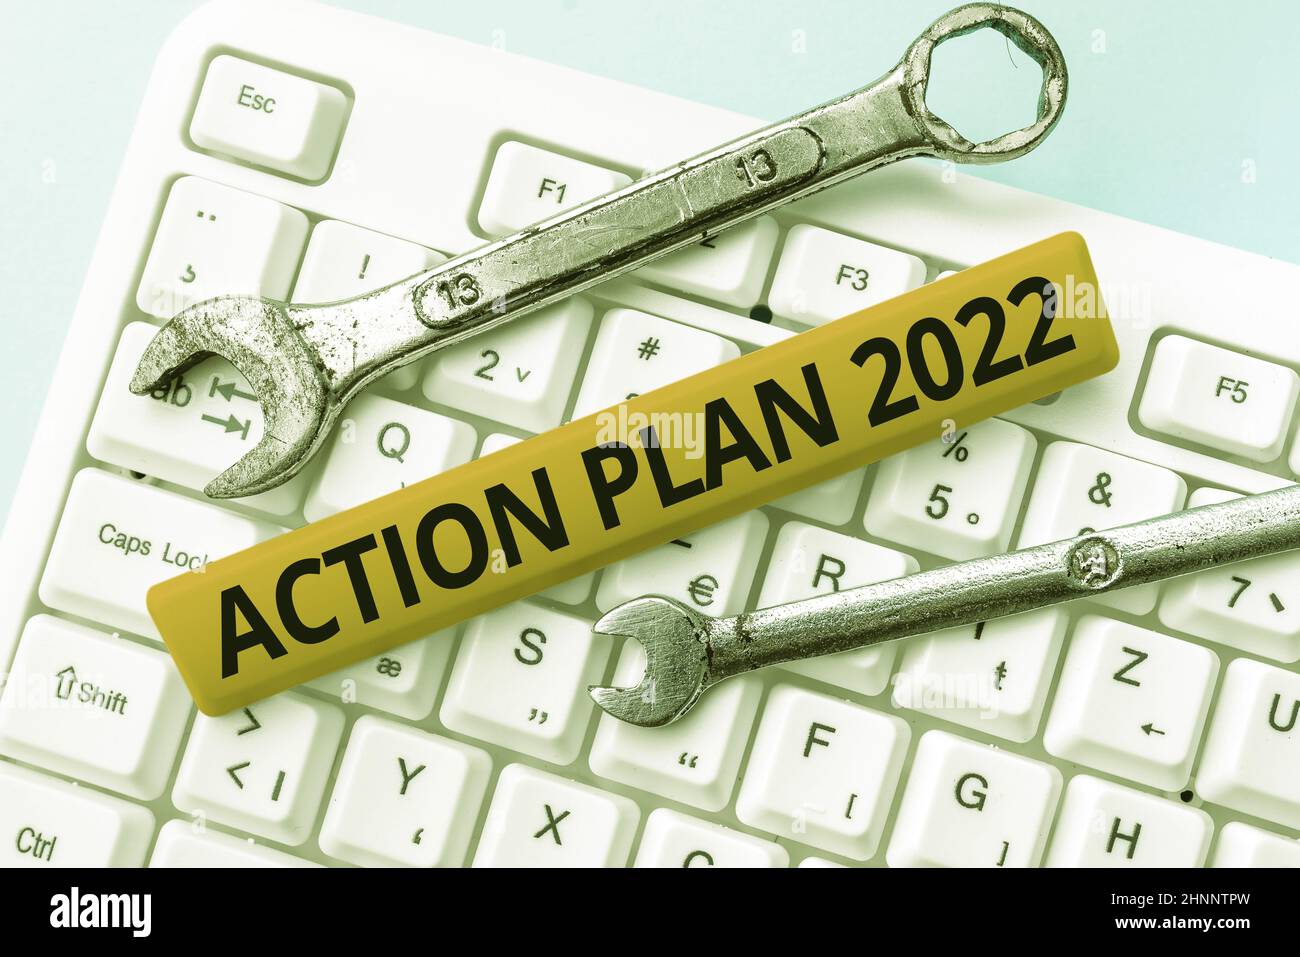 Conceptual display Action Plan 2022. Business idea proposed strategy or course of actions for current year Typing Game Program Codes, Programming New Playable Application Stock Photo